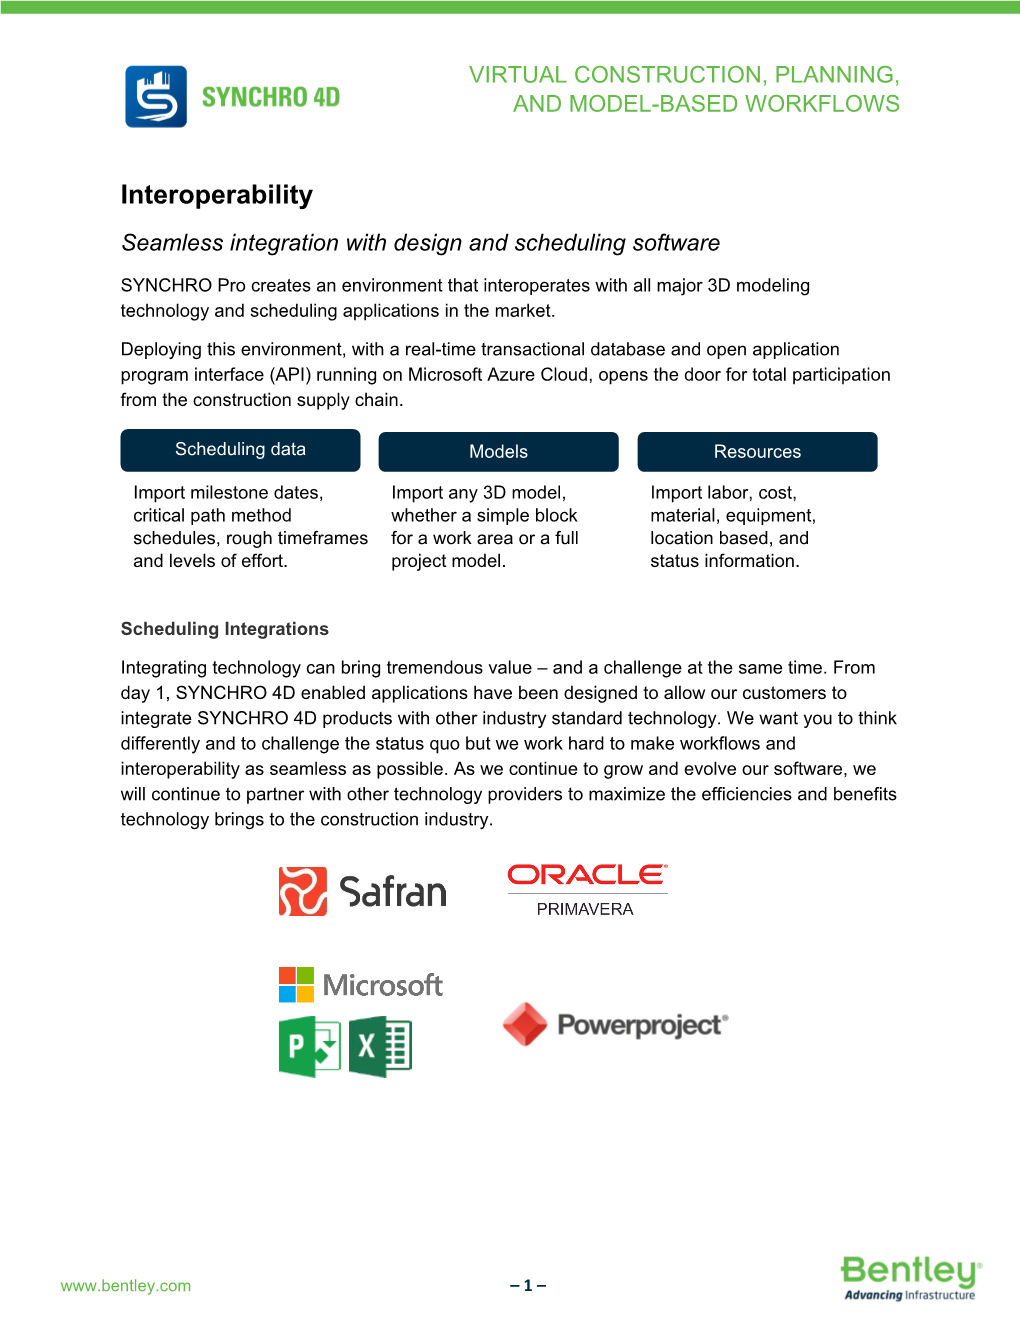 Interoperability Seamless Integration with Design and Scheduling Software